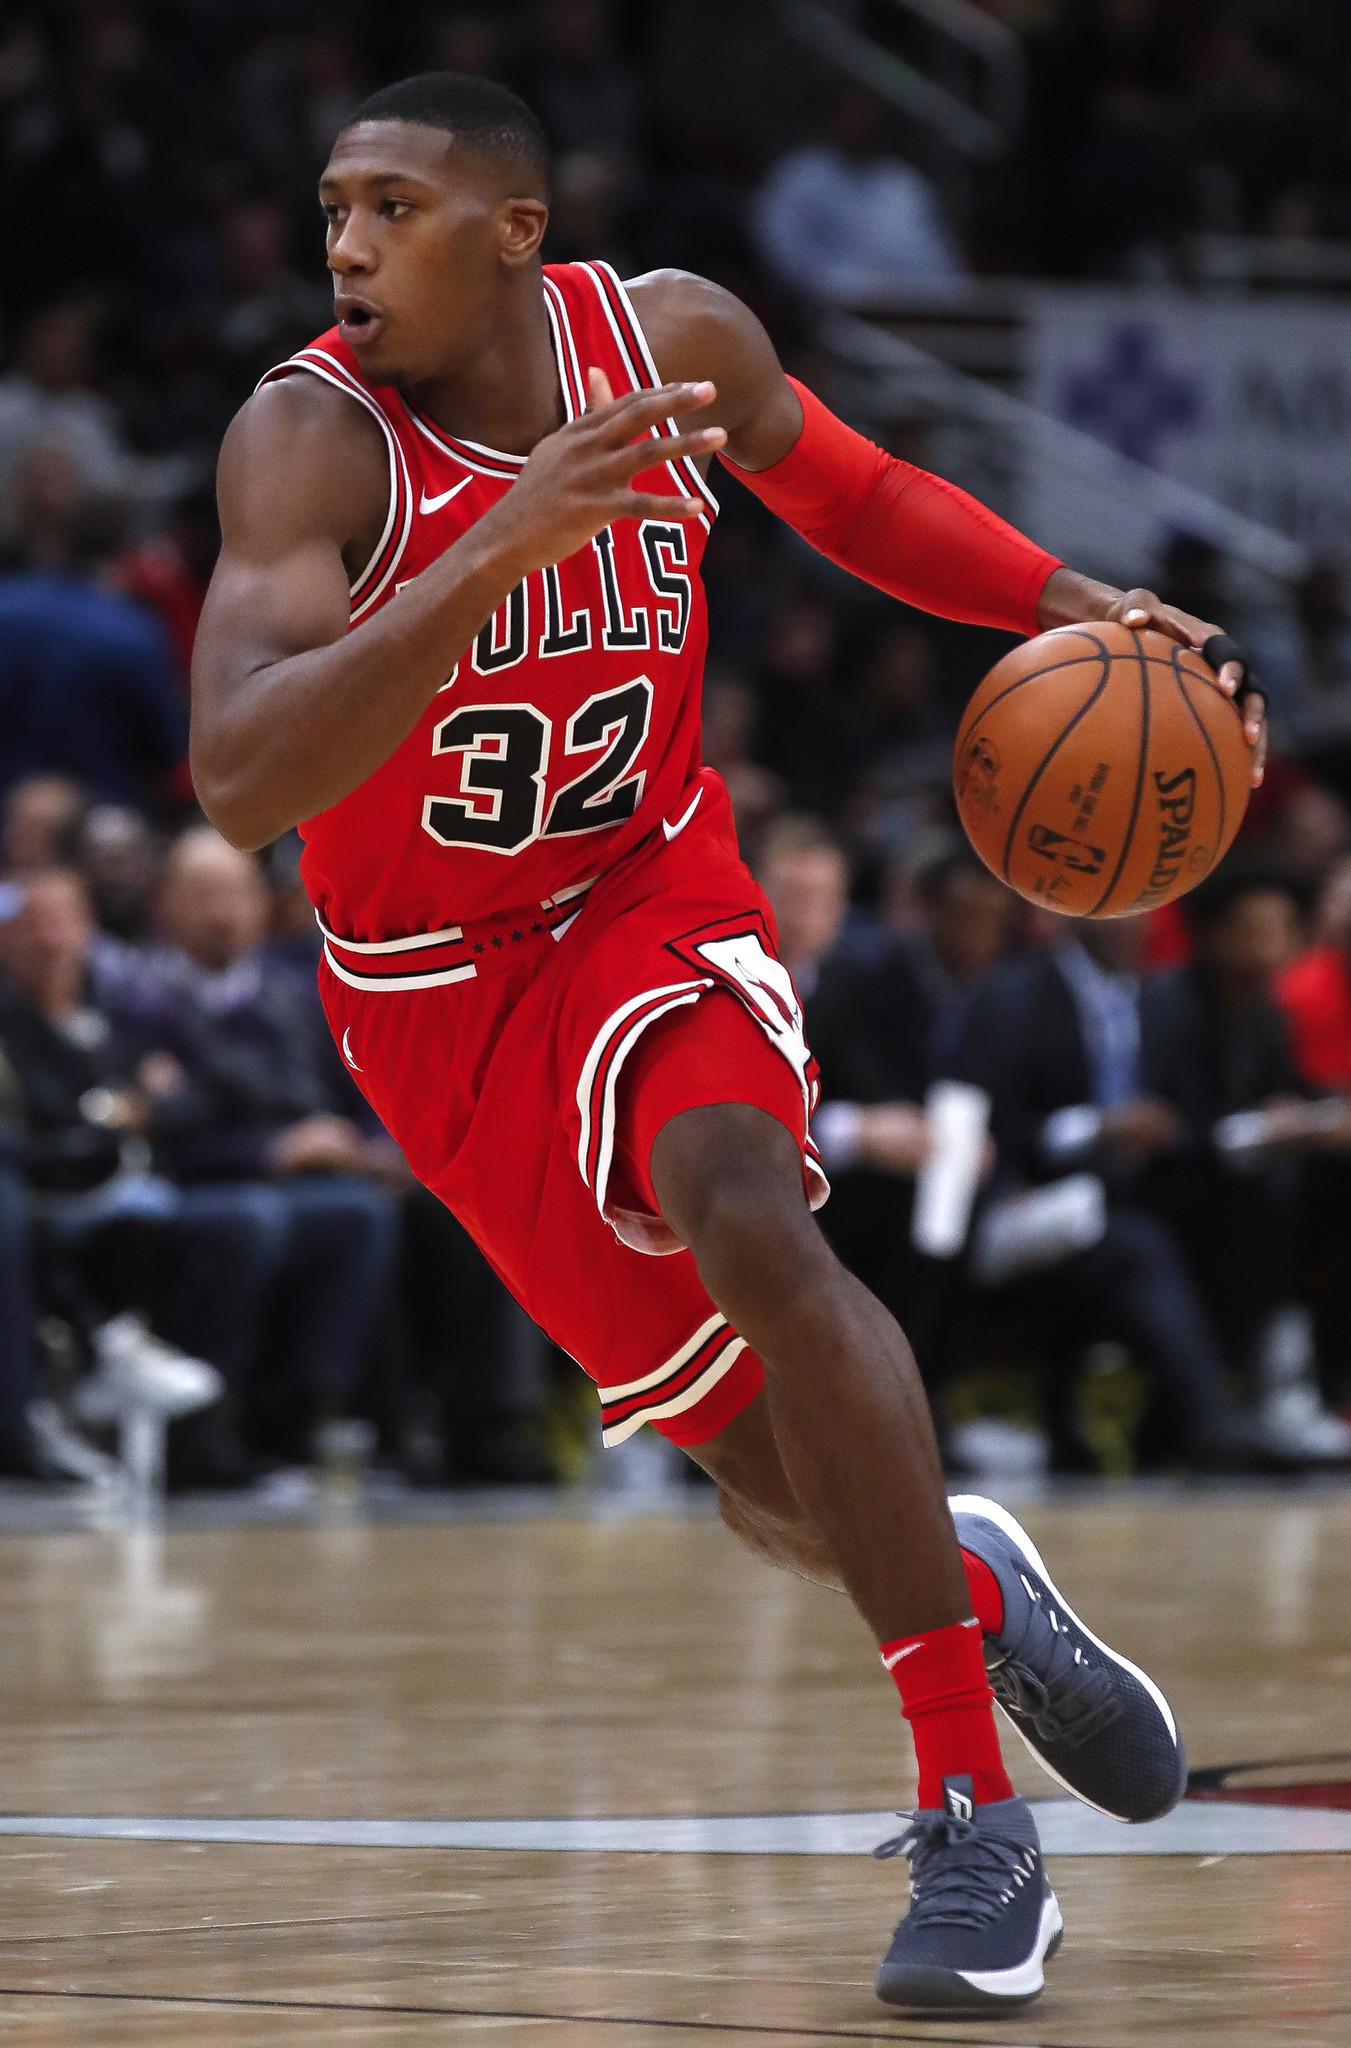 Kris Dunn's prolonged battle with Jerian Grant ends with a starting spot - Chicago Tribune